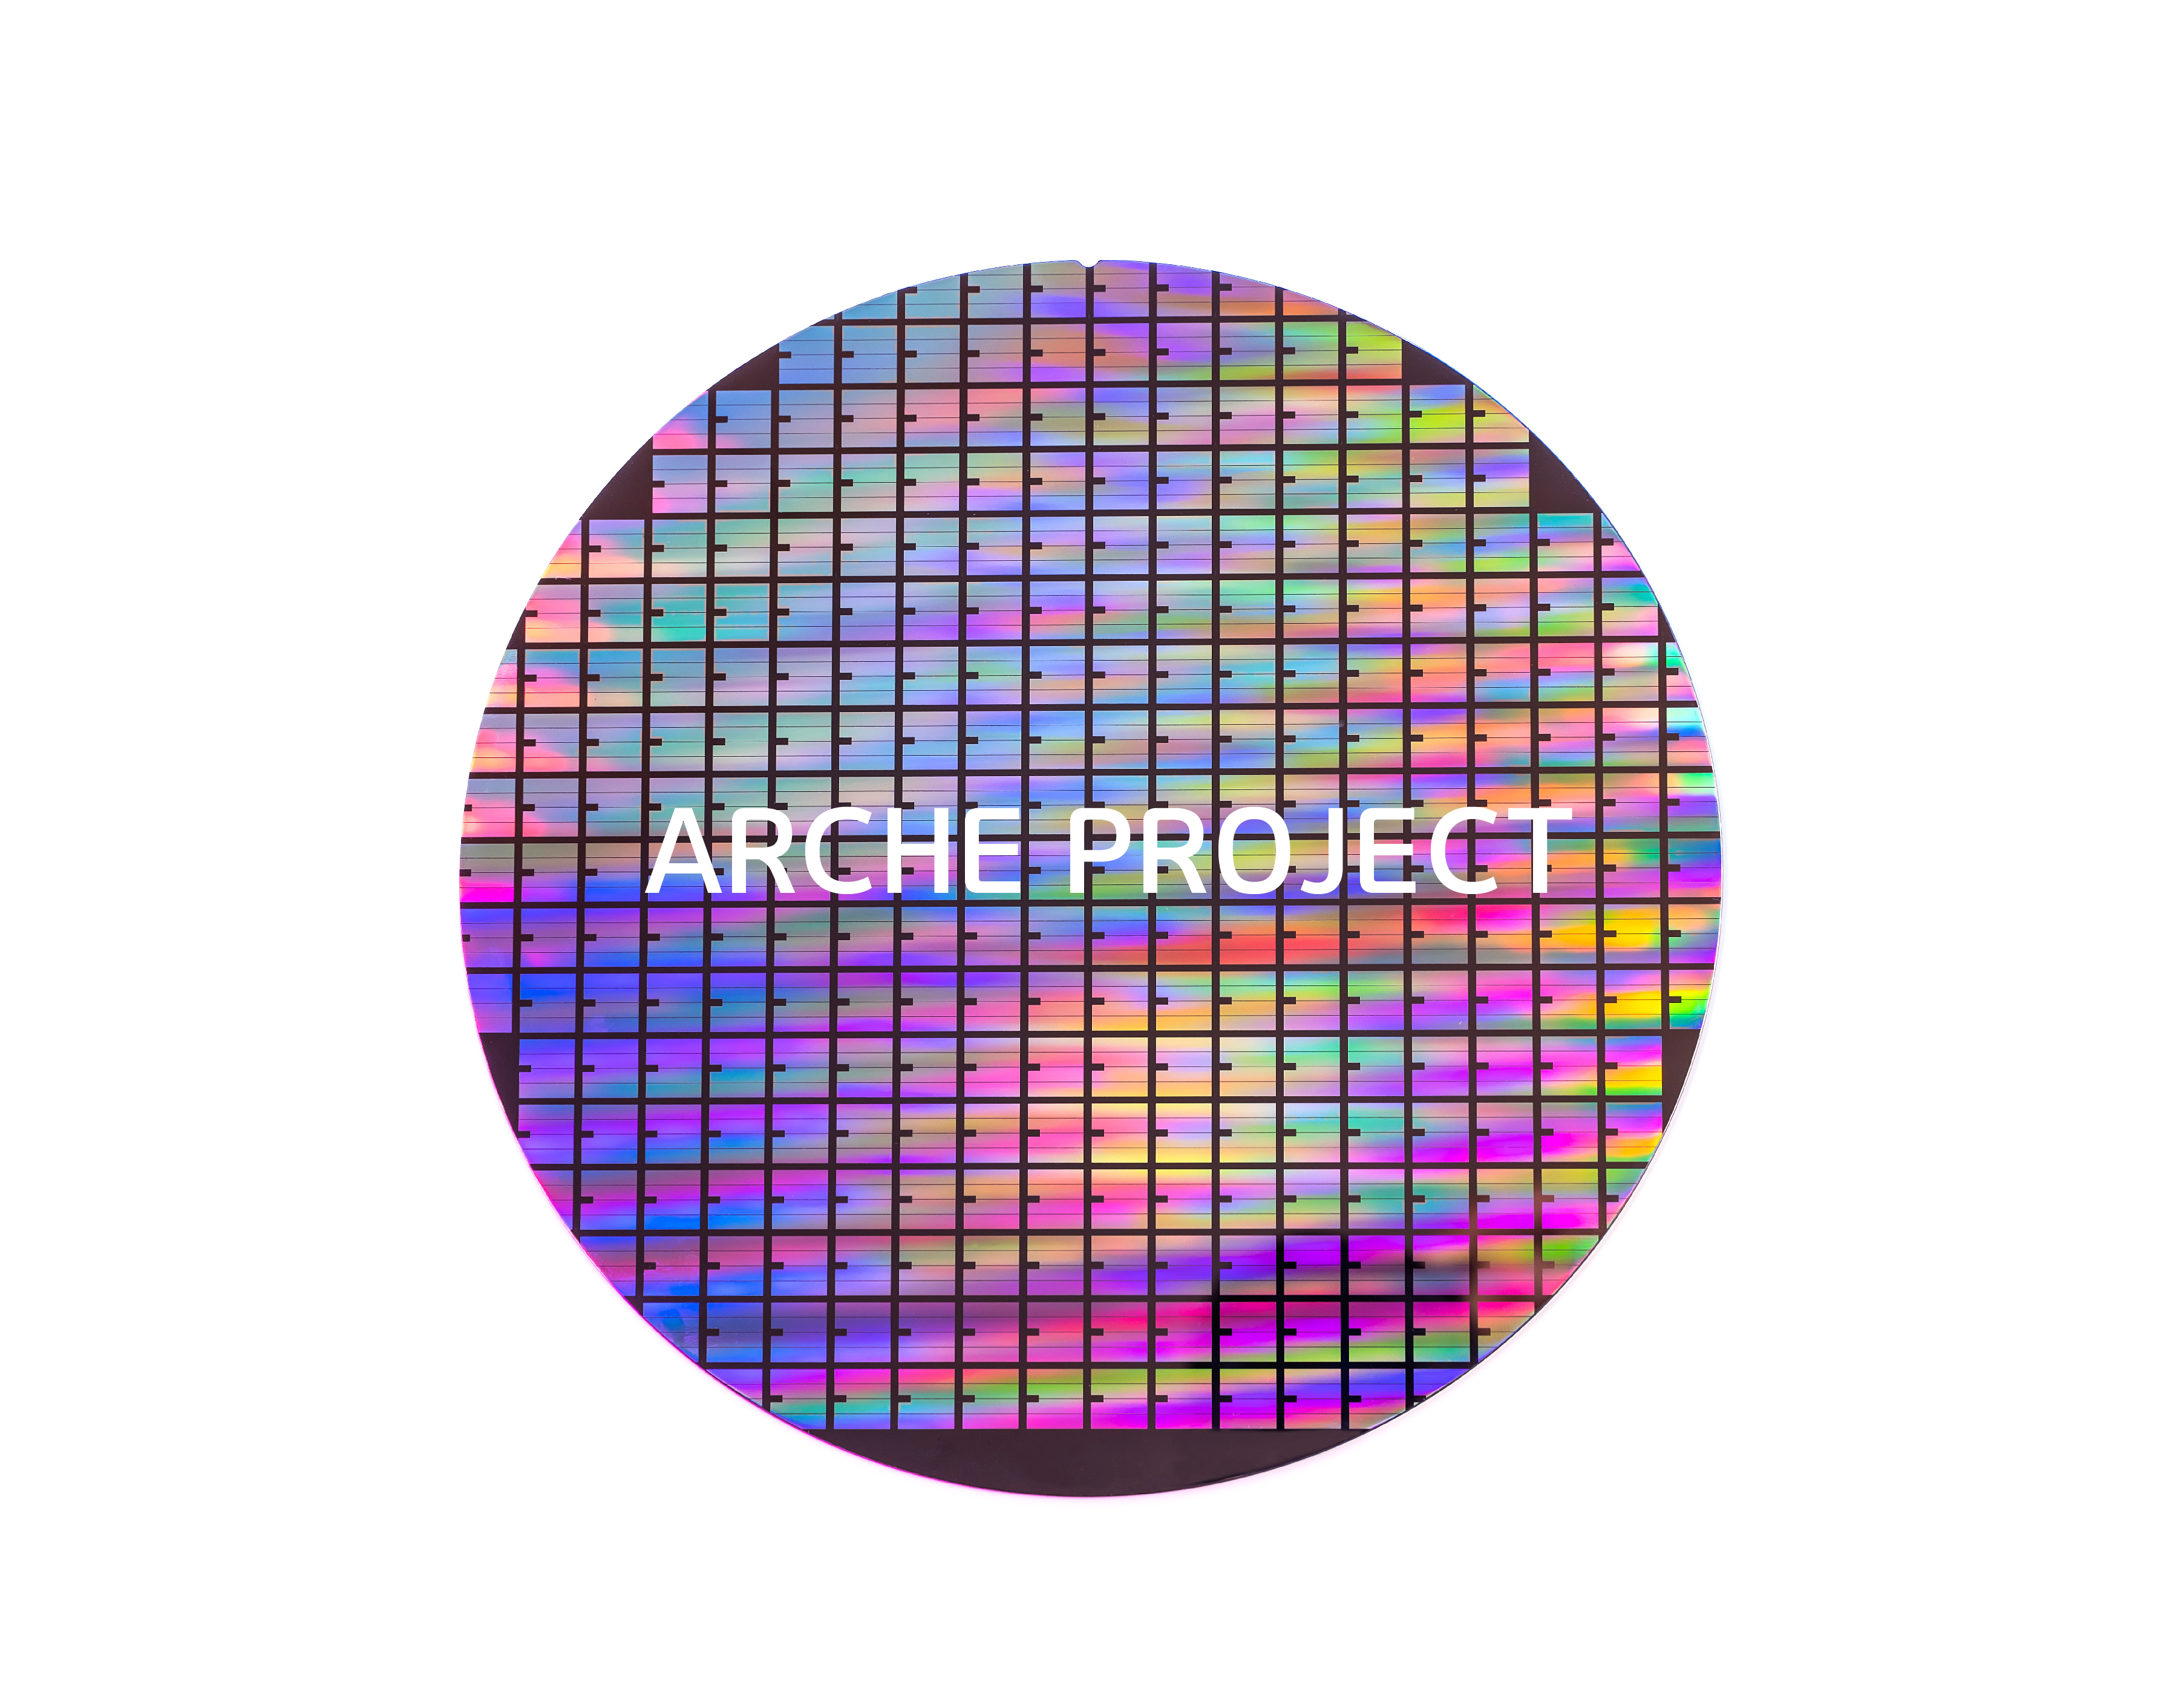 ARCHE PROJECT